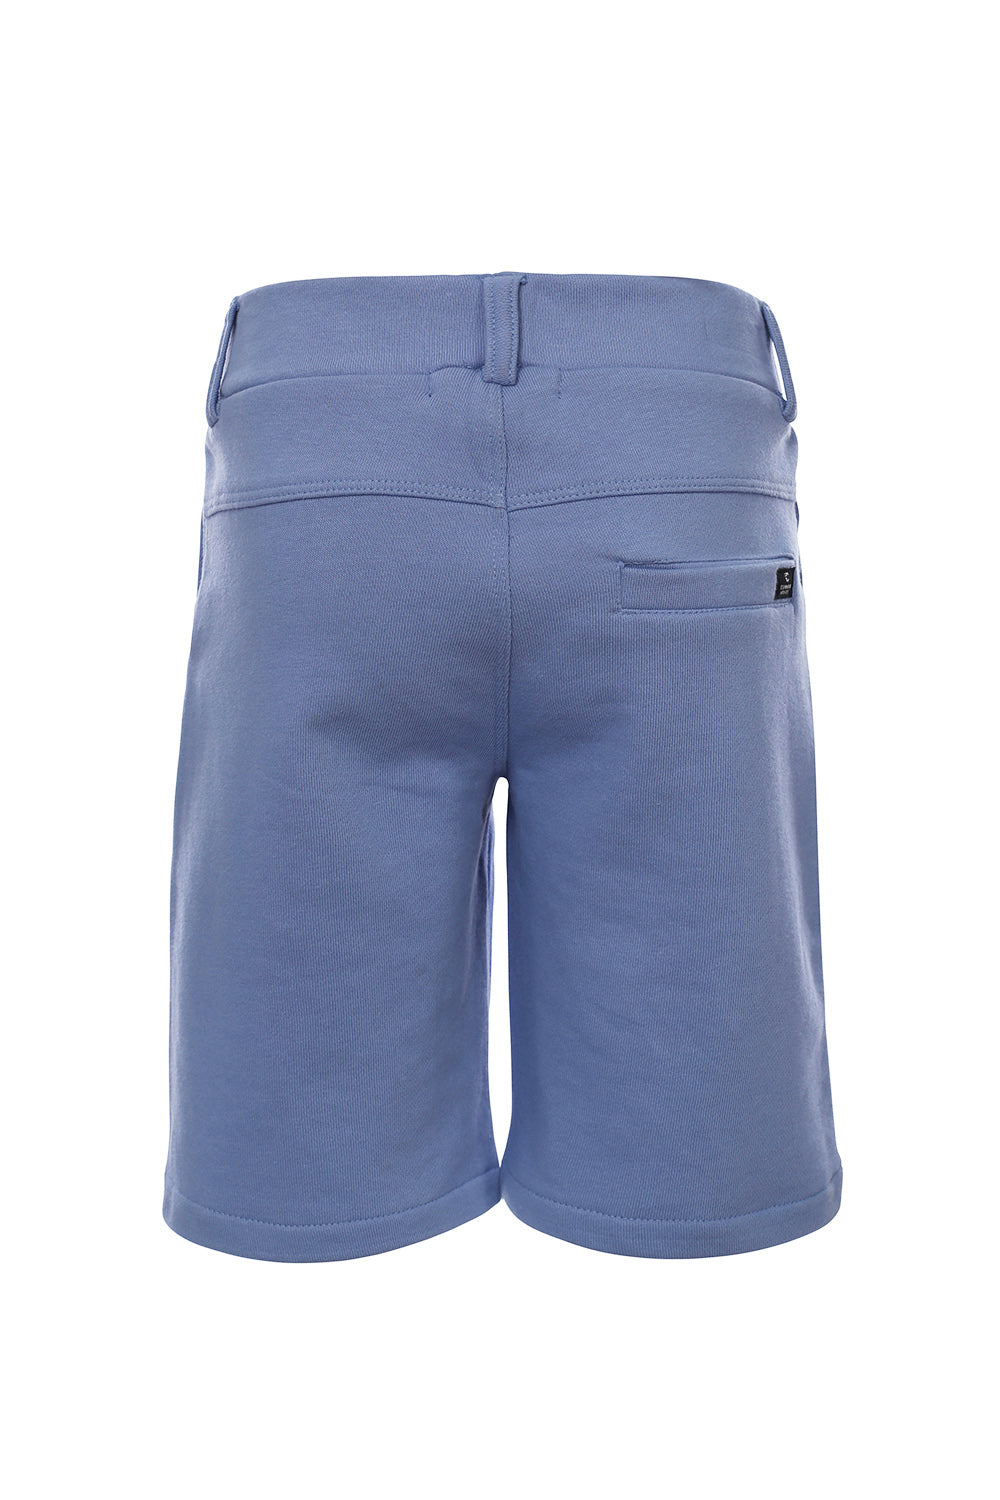 Common Heroes Sweat Shorts